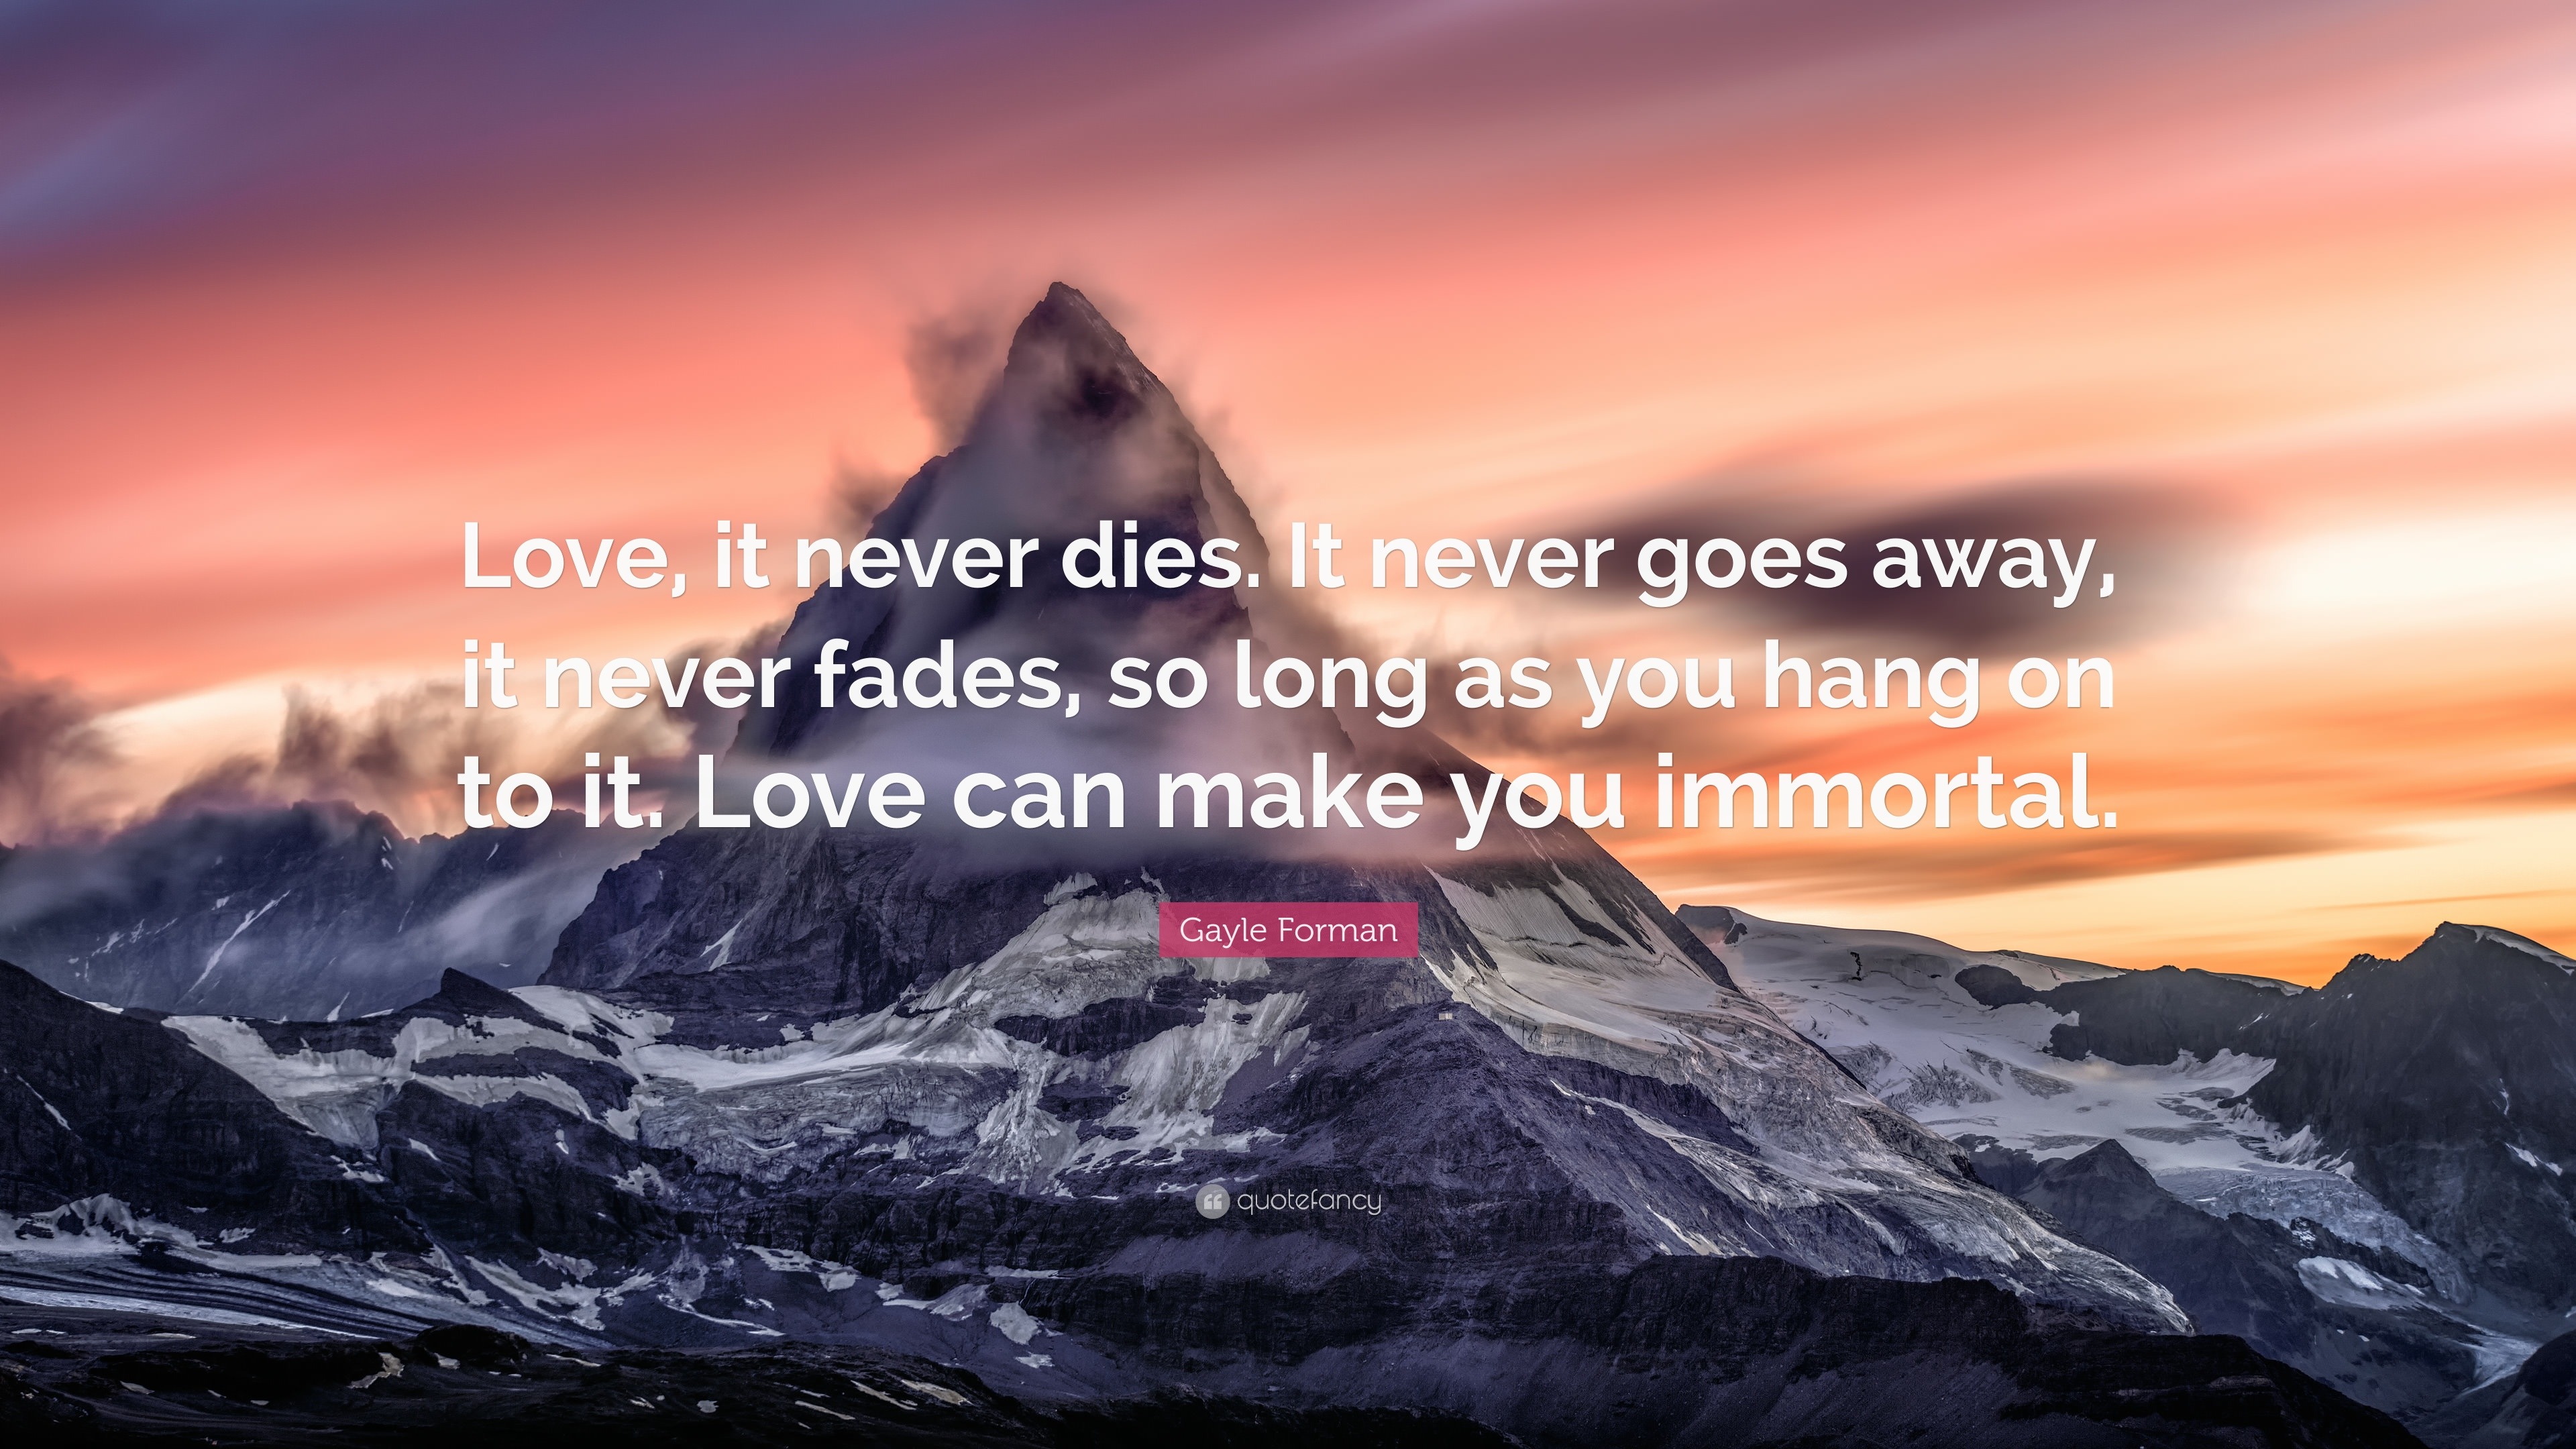 Gayle Forman Quote “Love it never s It never goes away